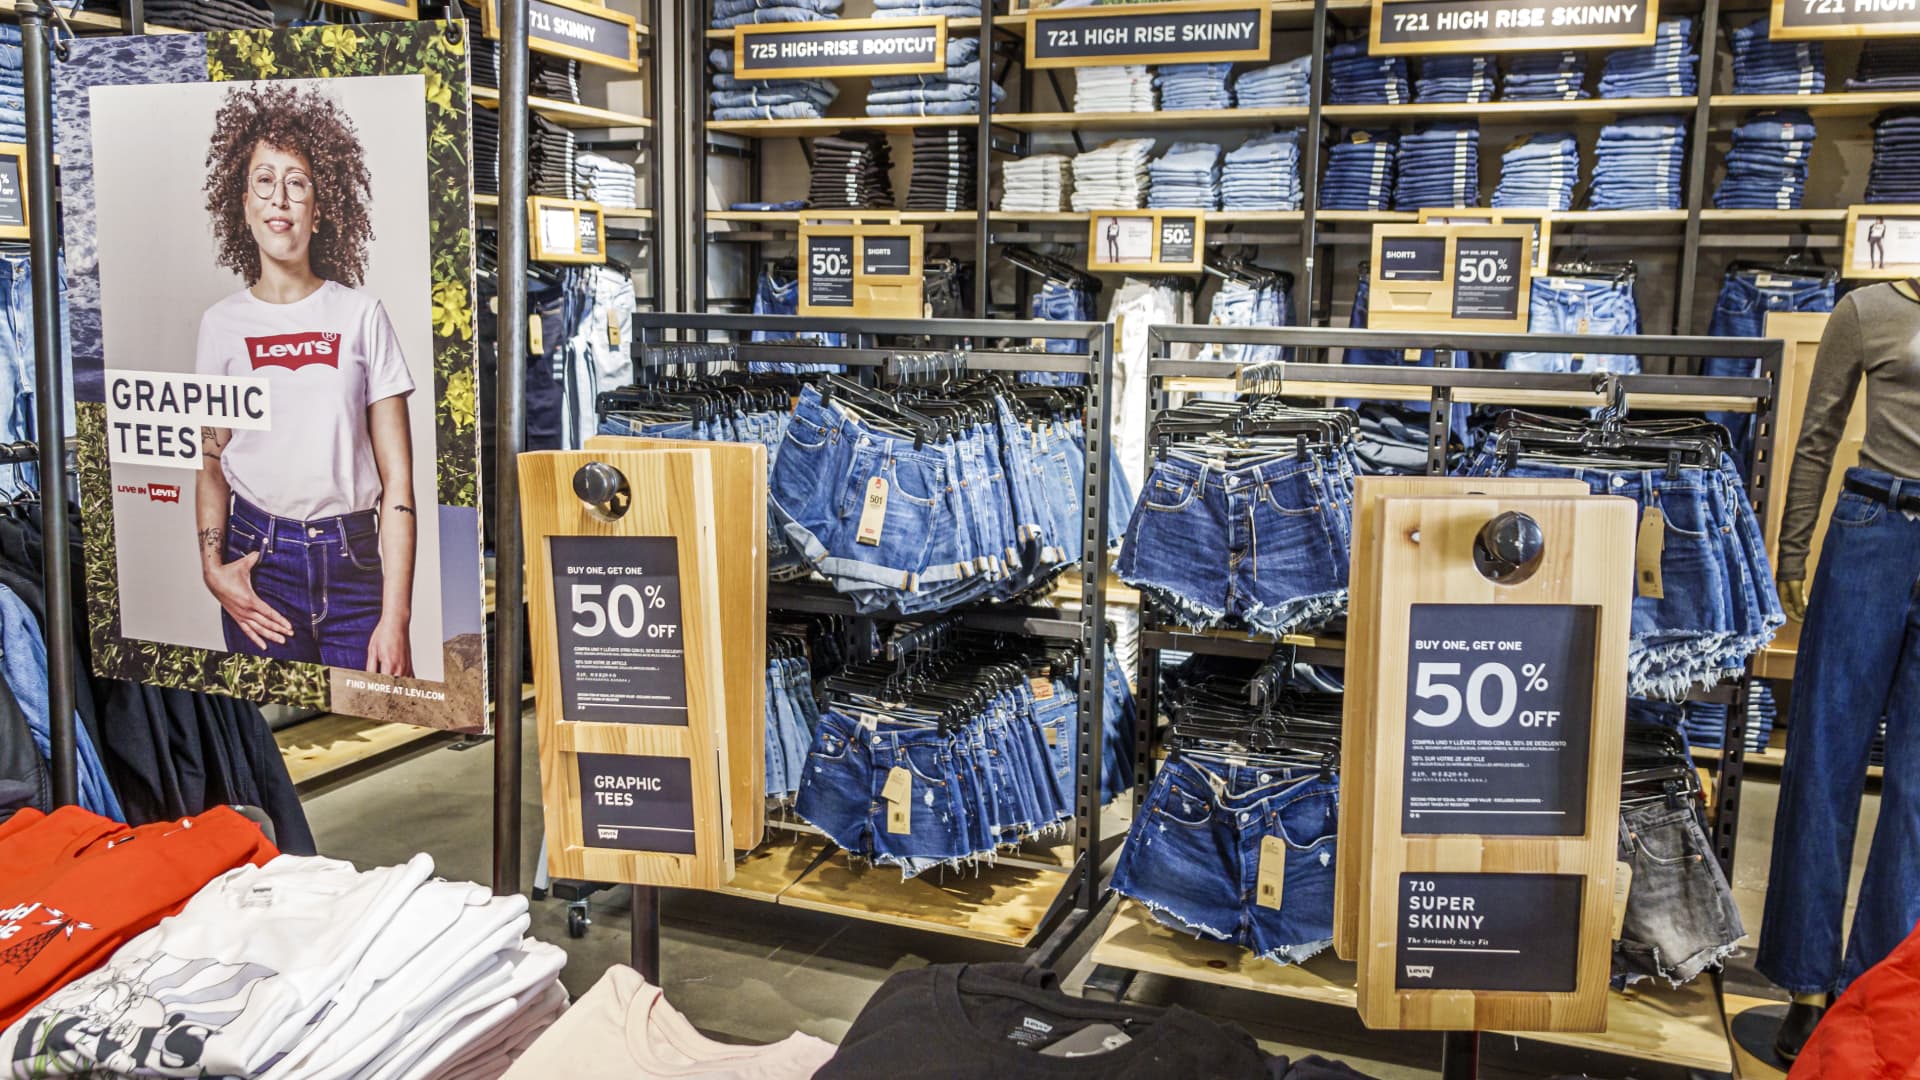 Western clothing craze means sales of Levi’s denim skirts have doubled